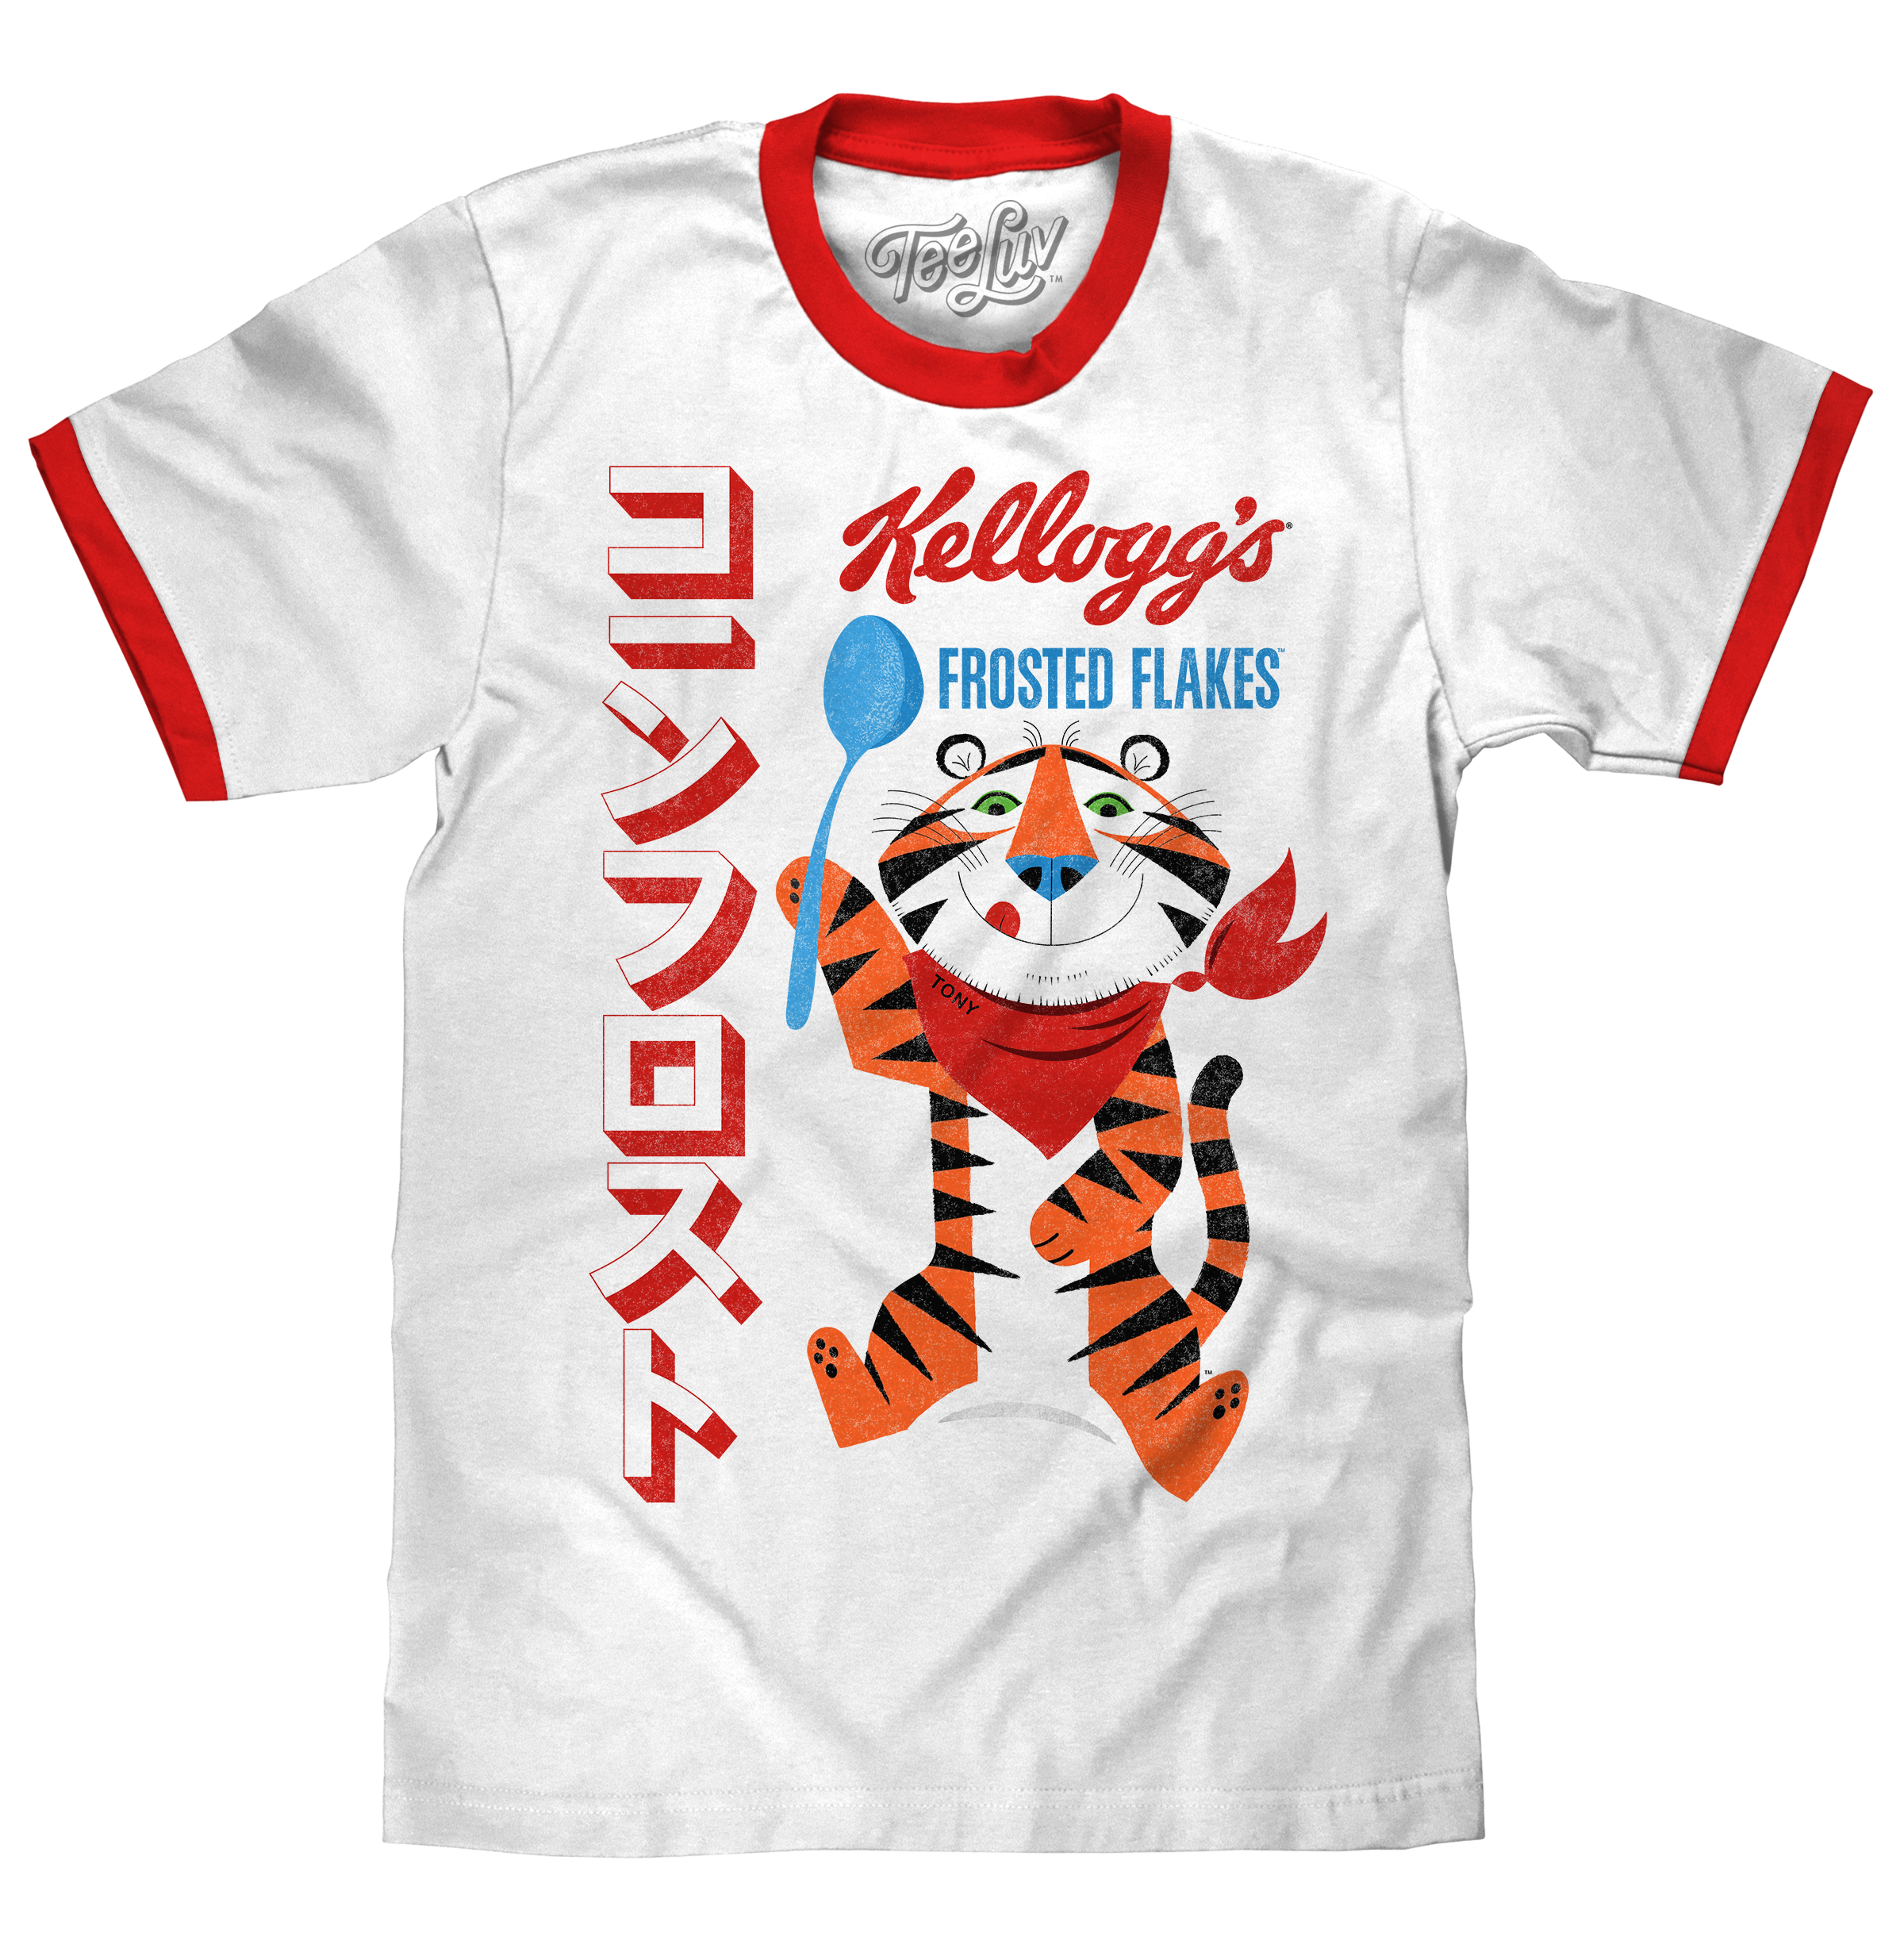 Tee Luv Frosted Flakes Tony The Tiger Ringer T-Shirt - White and Red XXX-Large